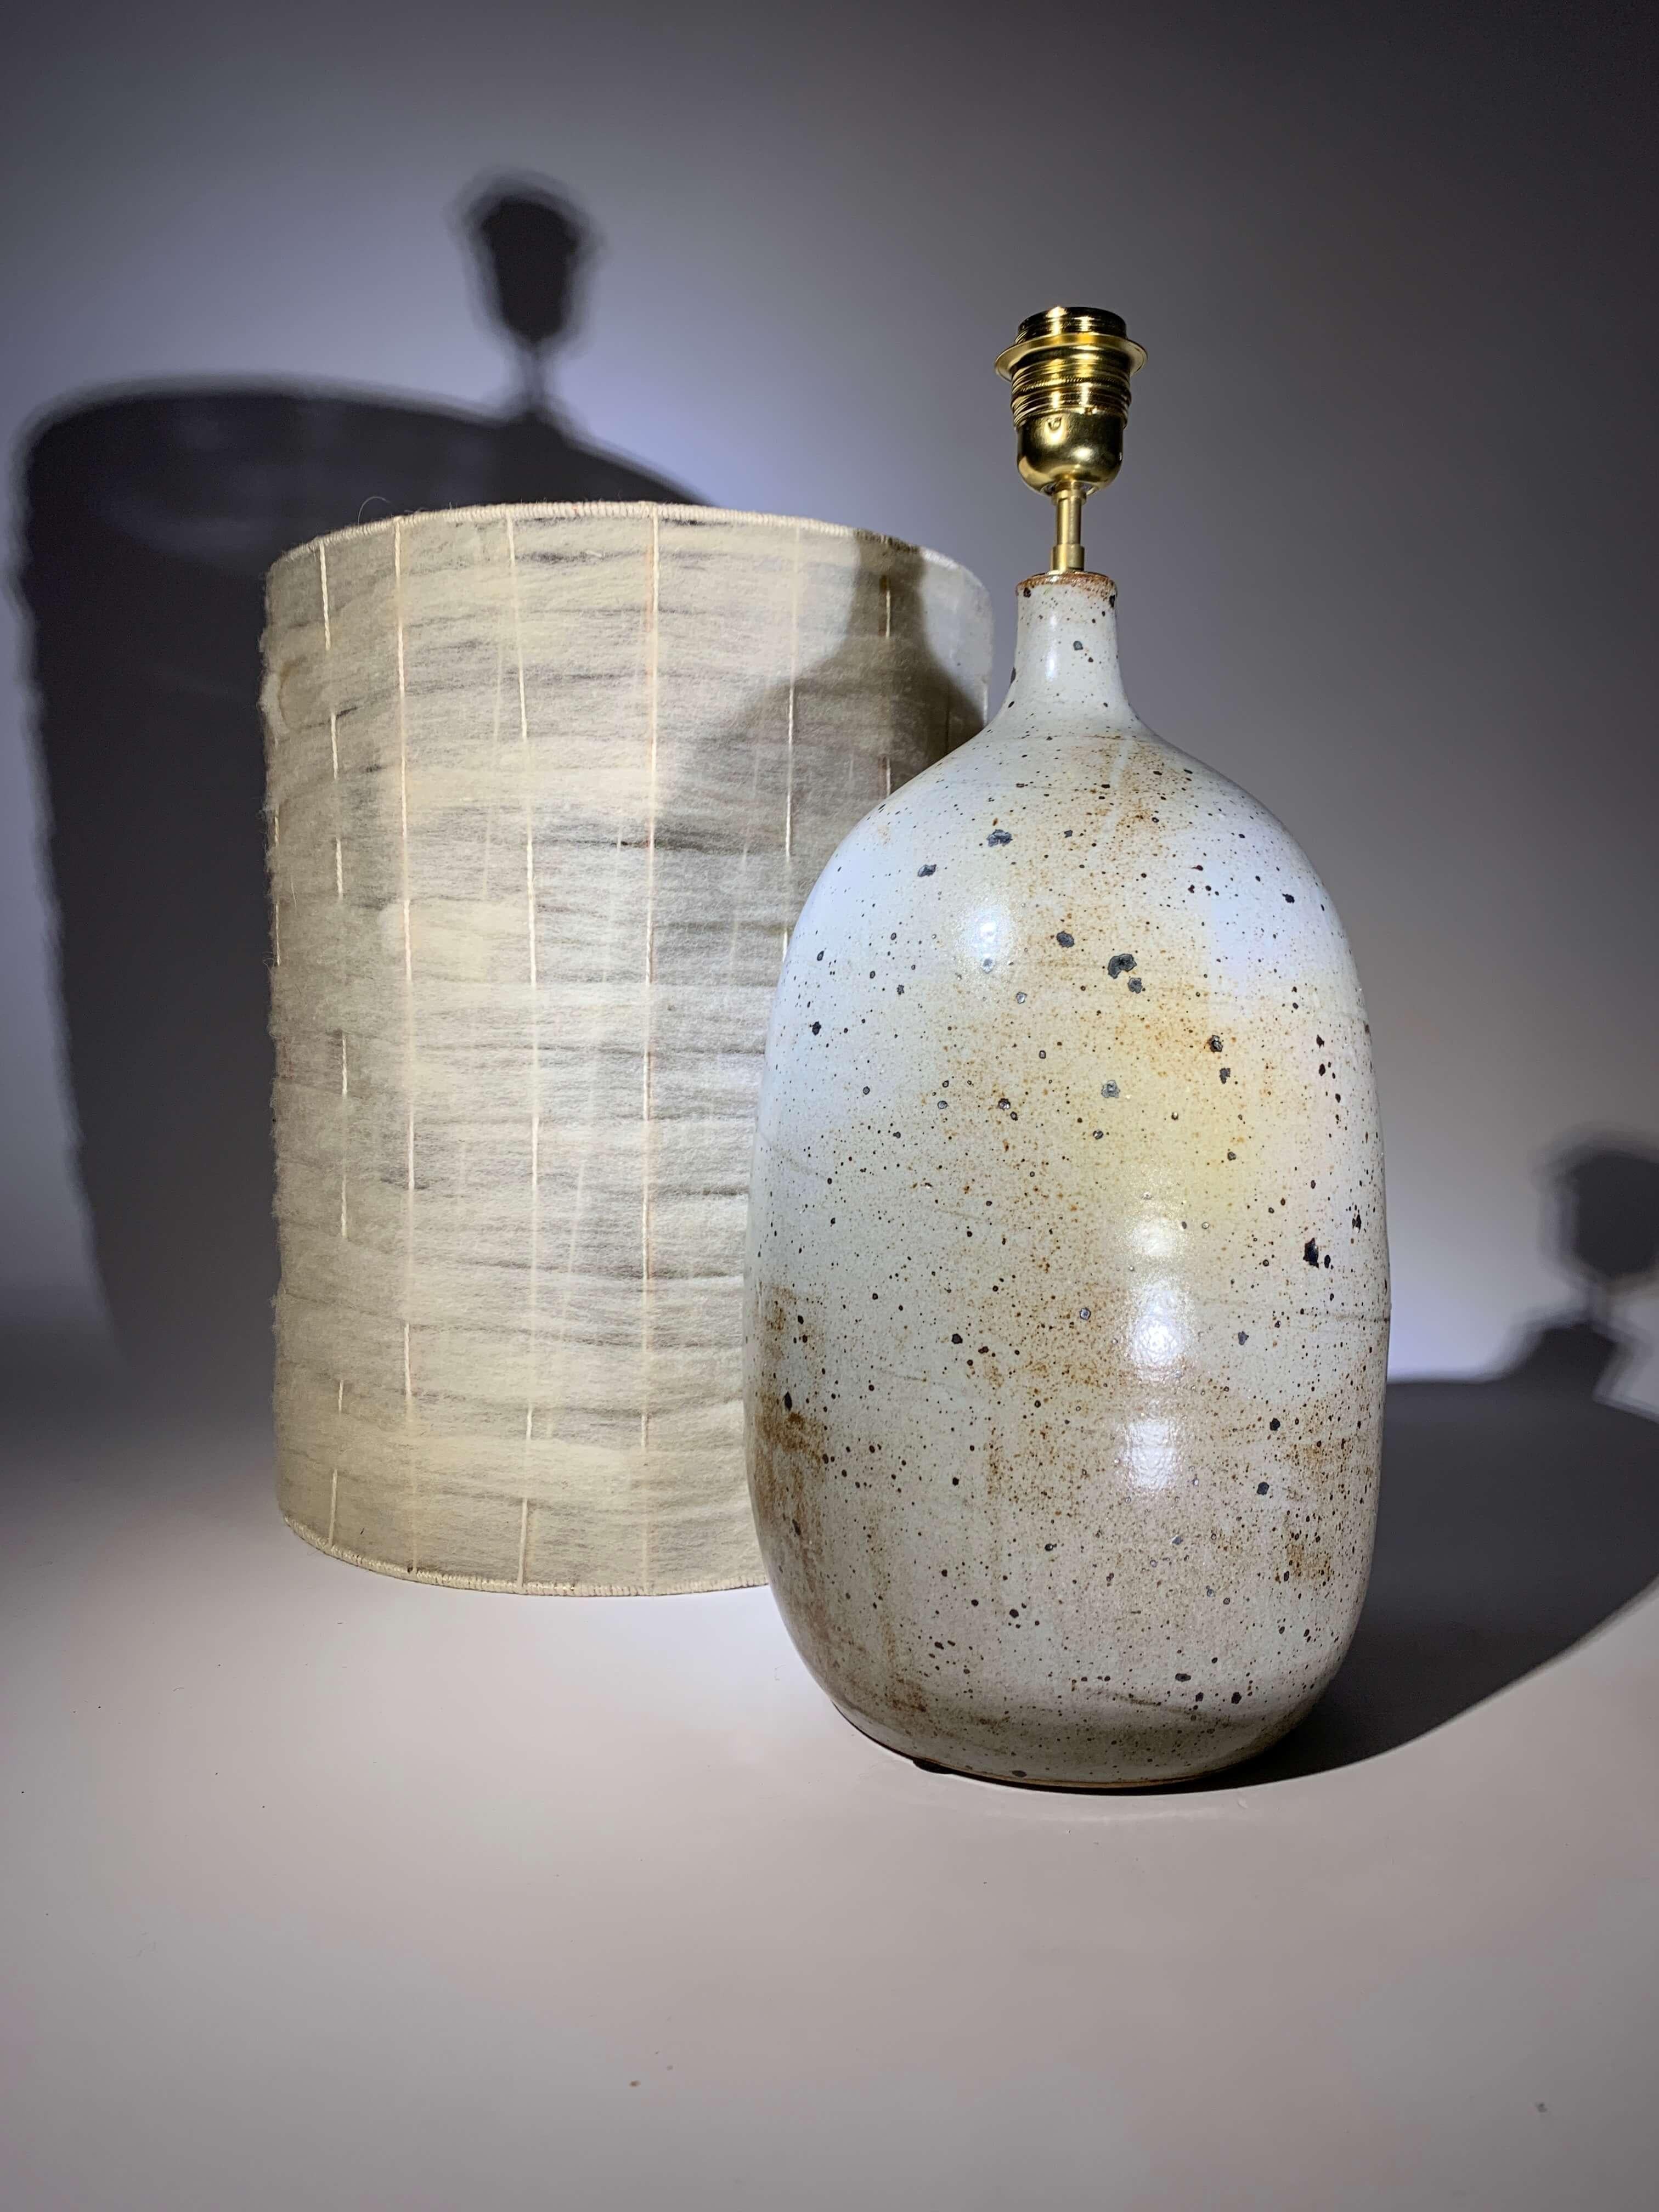 The sandstone of Puisaye, where potters have been working since the 14th century. This imposing pyrite sandstone lamp is a beautiful demonstration of ancestral knowledge, 
exhibiting splendid cooking effects over a wood fire.
Sold with custom-made